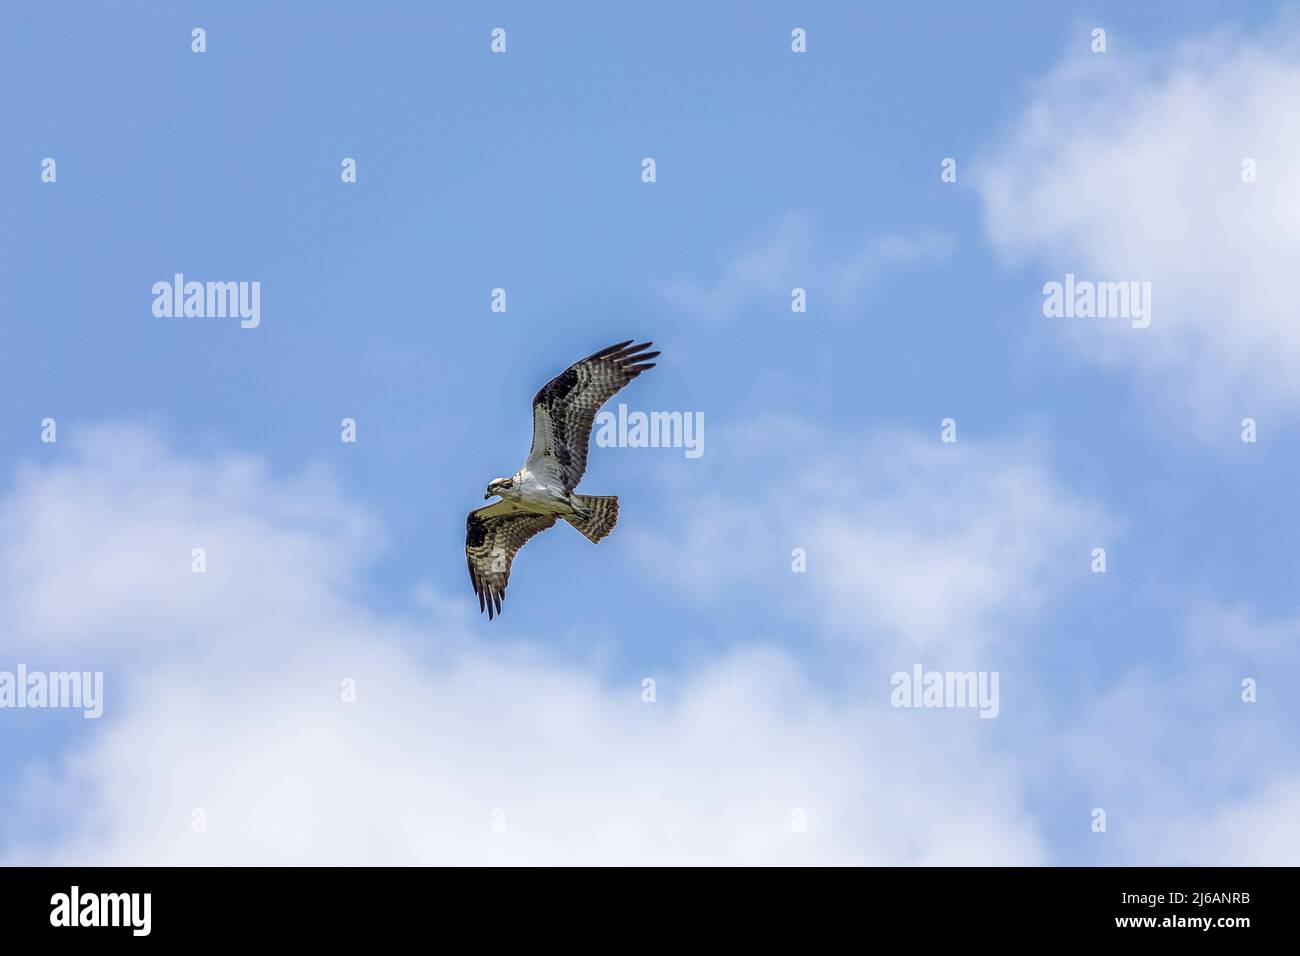 Osprey flyng over the wetlands at Payes prairie preserve state park in Gainesville, Florida Stock Photo